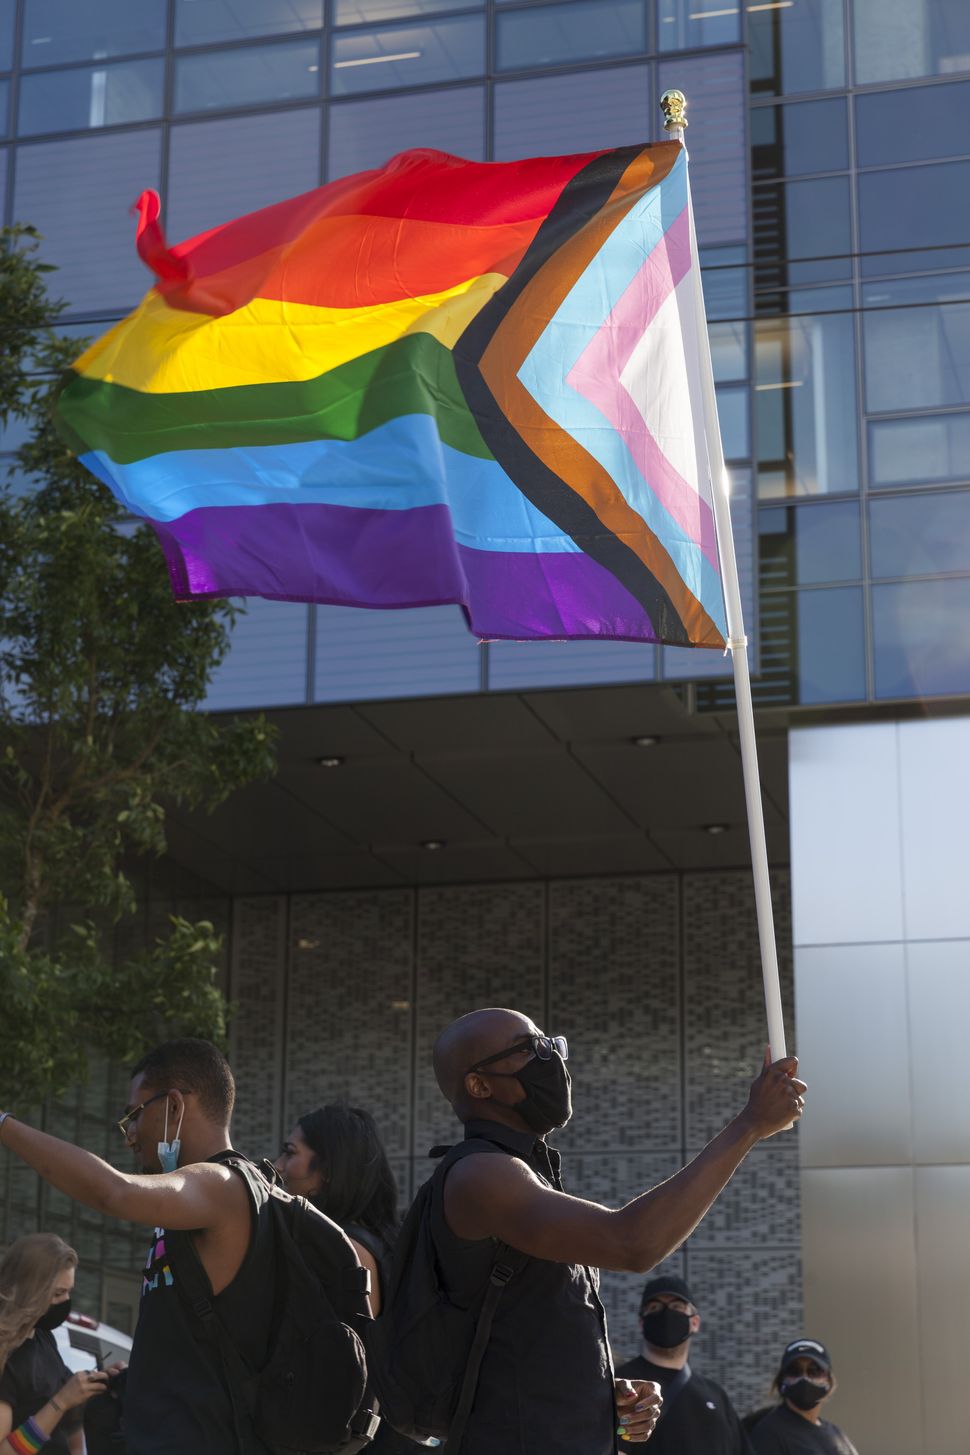 The Progress flag displayed during the All Black Lives Matter march in Seattle.